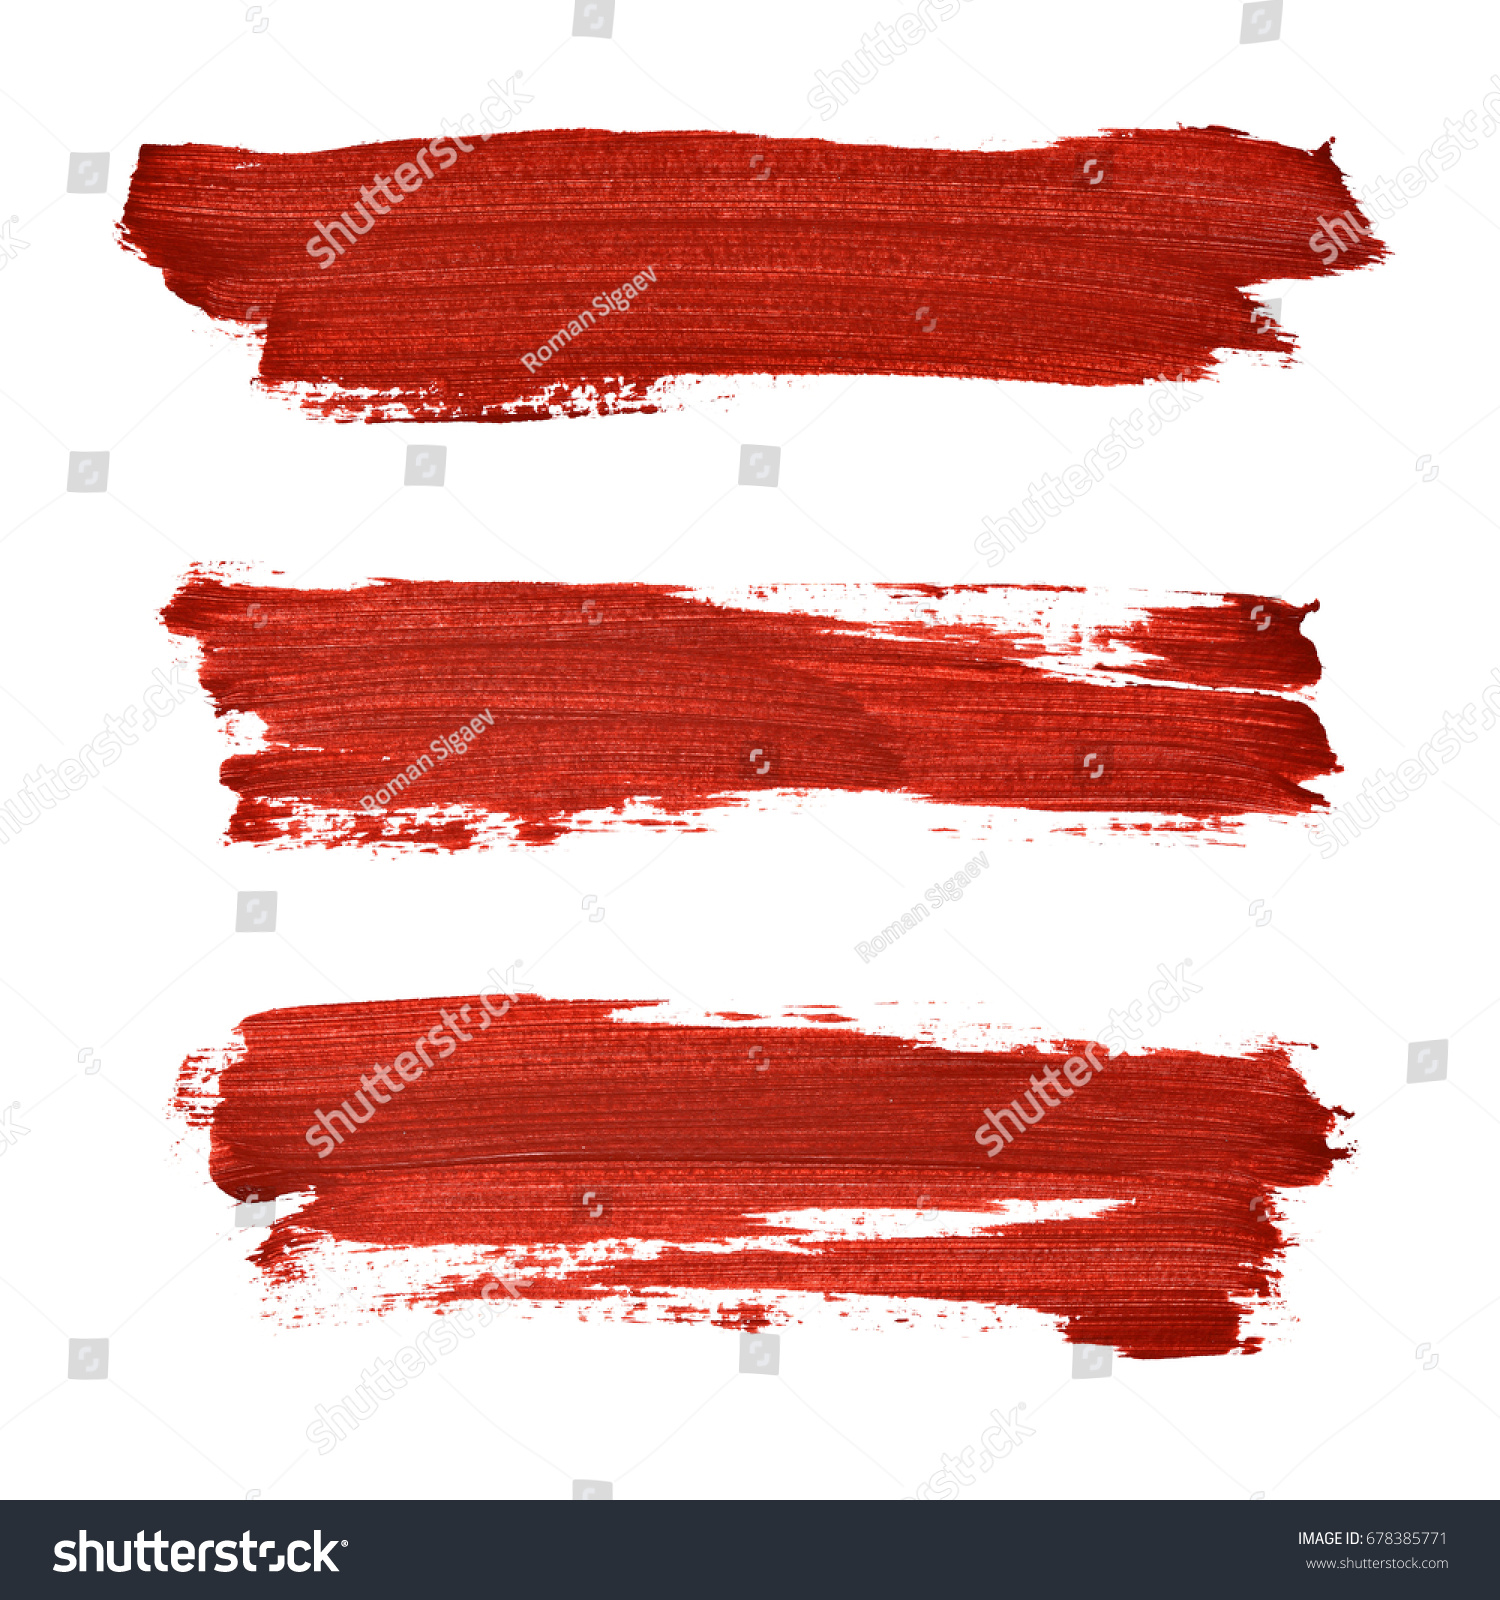 Brush strokes of red acrylic paint isolated on the white background  #678385771